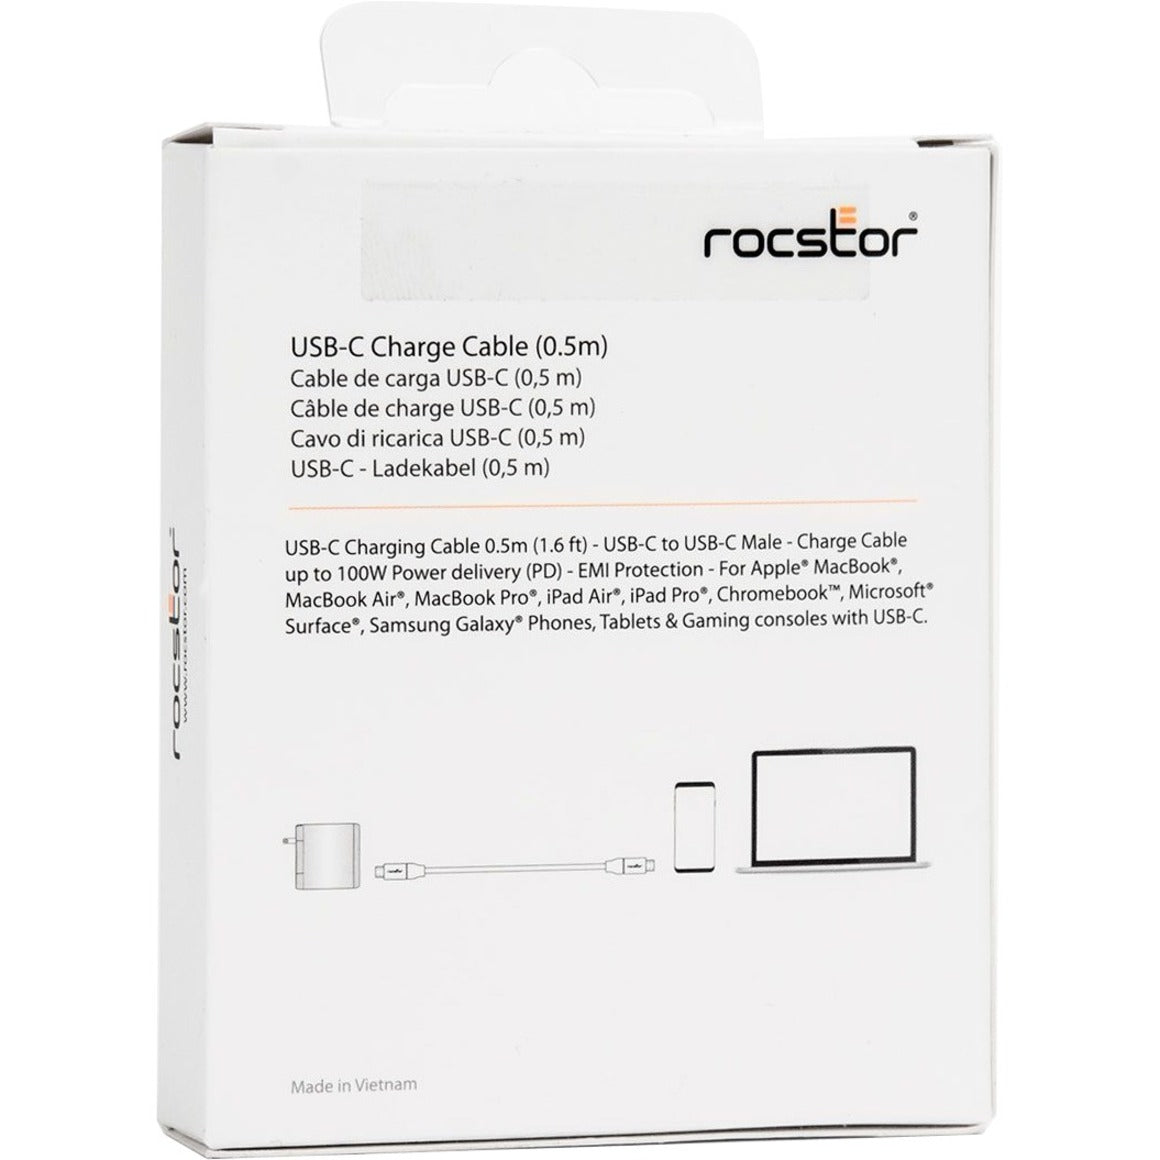 Rocstor Y10C272-W1 Premium USB-C Charging Cable Up to 100W Power Delivery, Fast Charging, EMI Protection